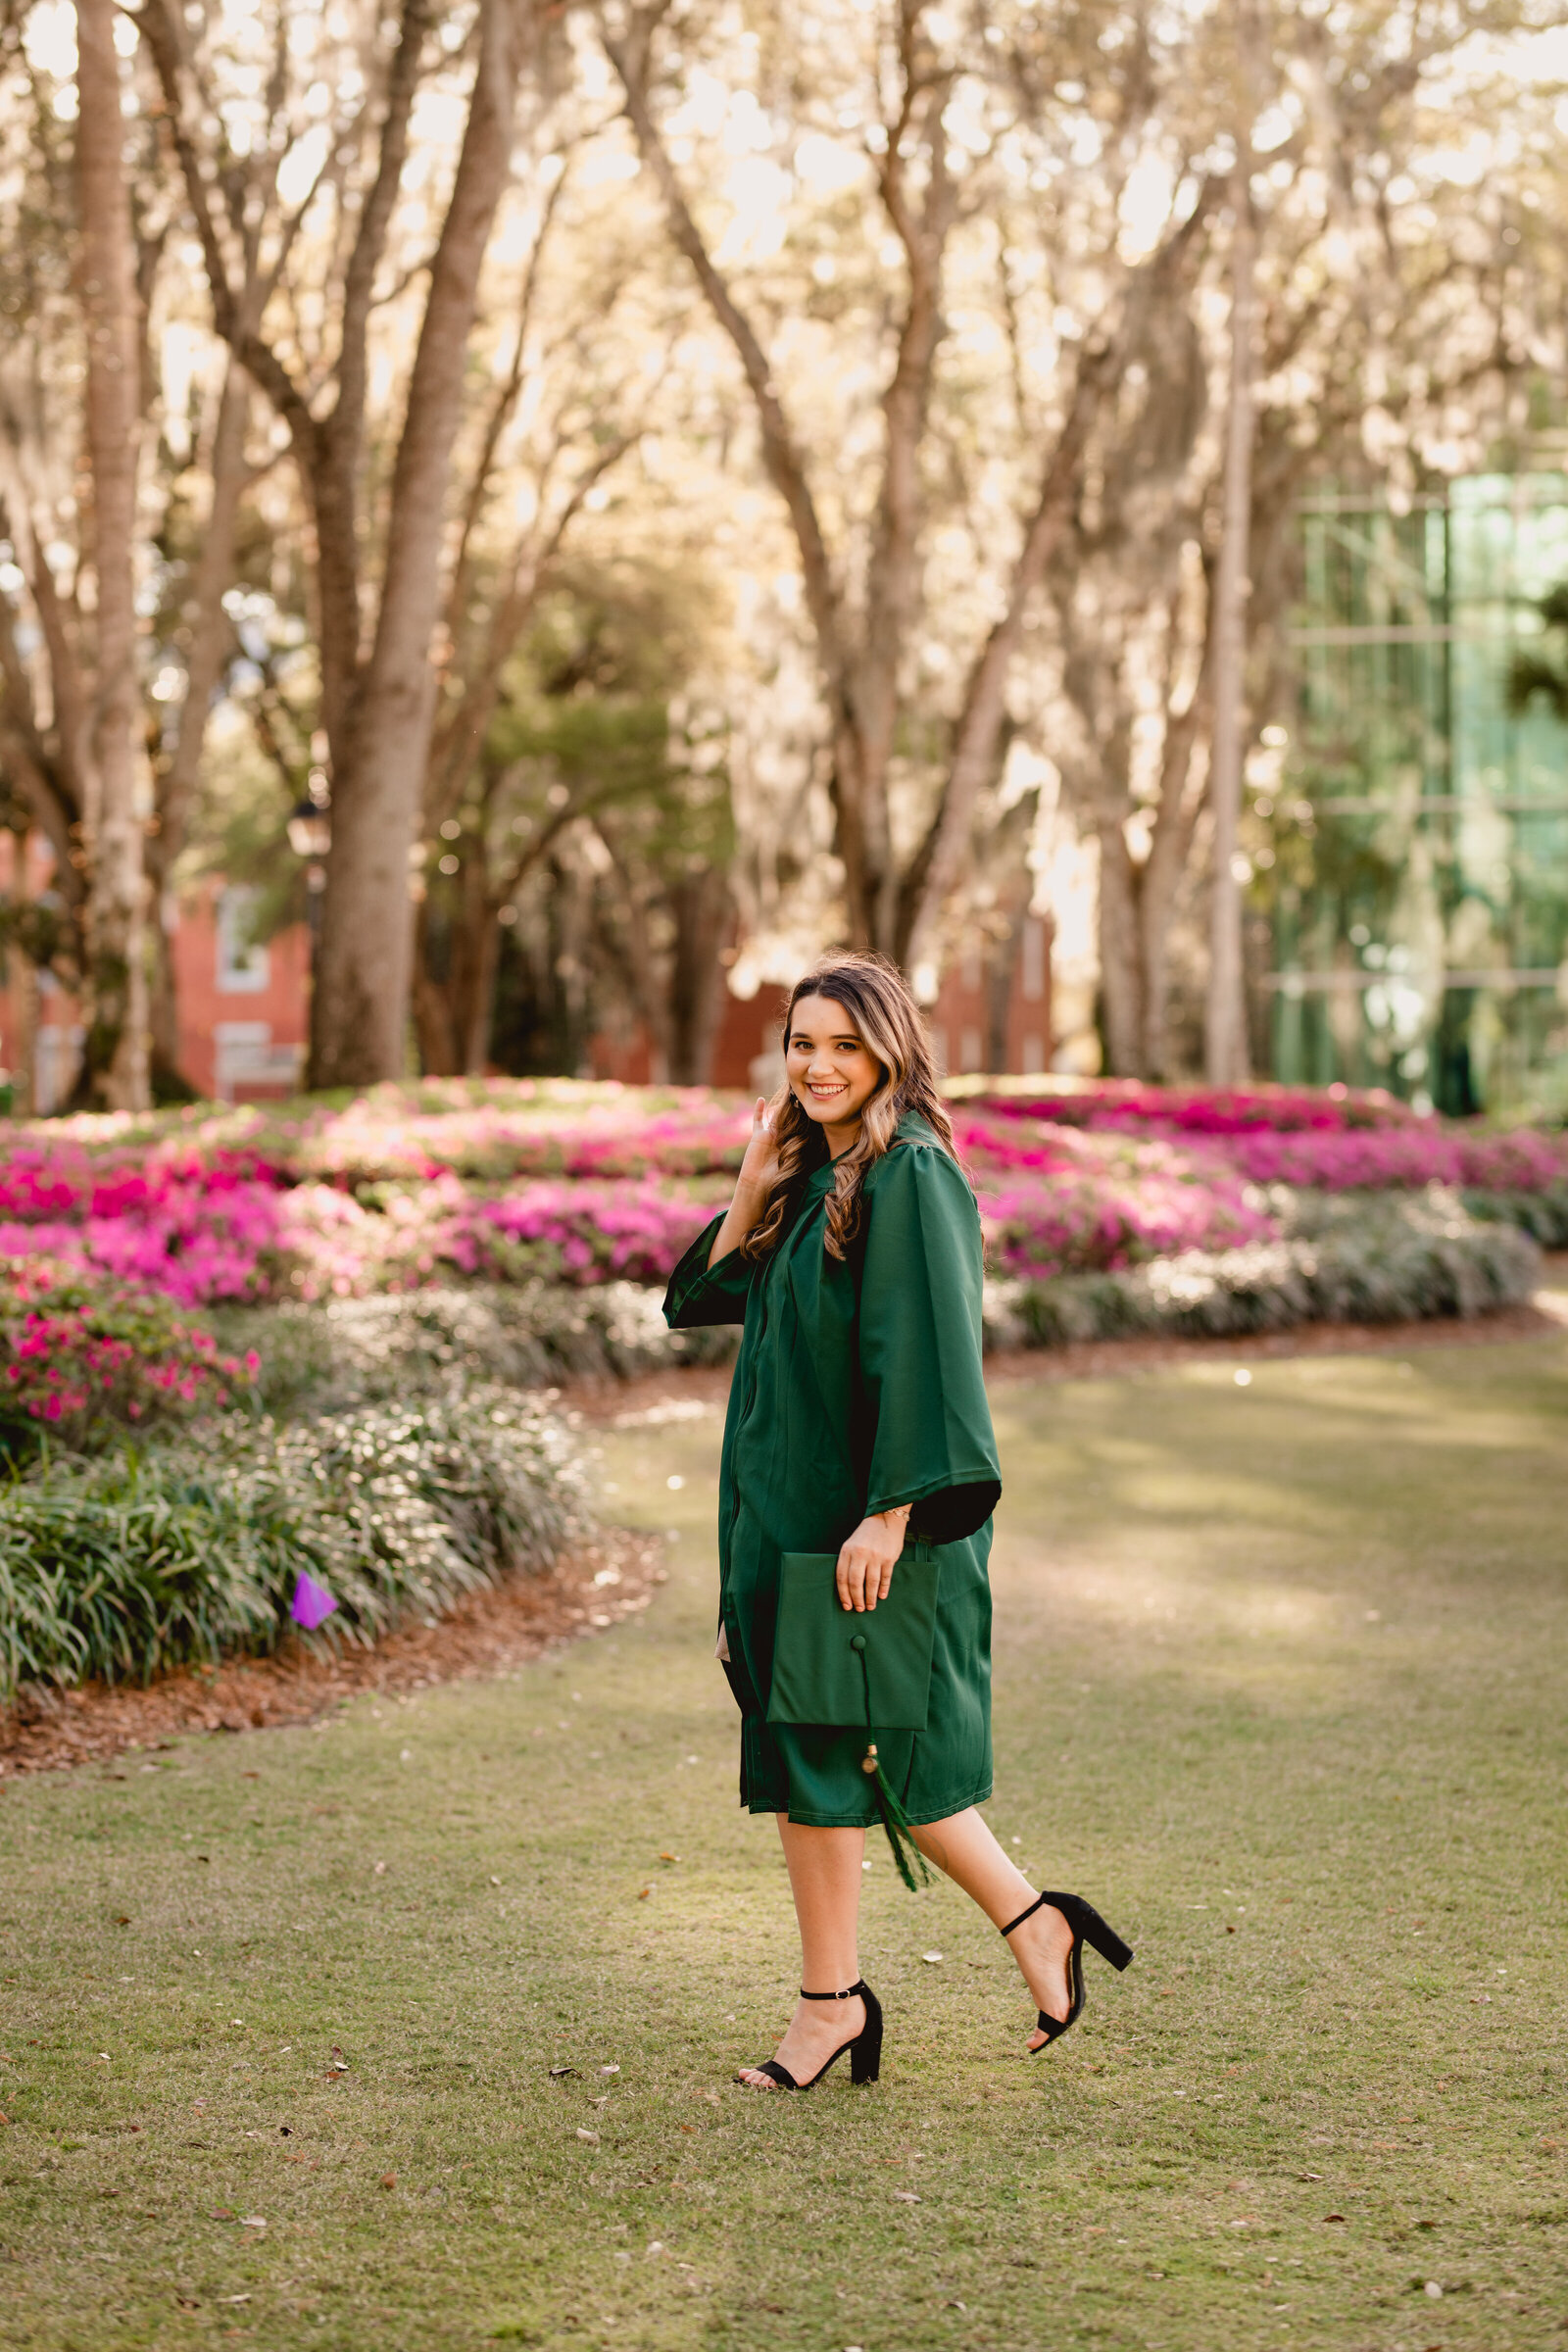 Stetson university graduate pictures on lawn with flowers.